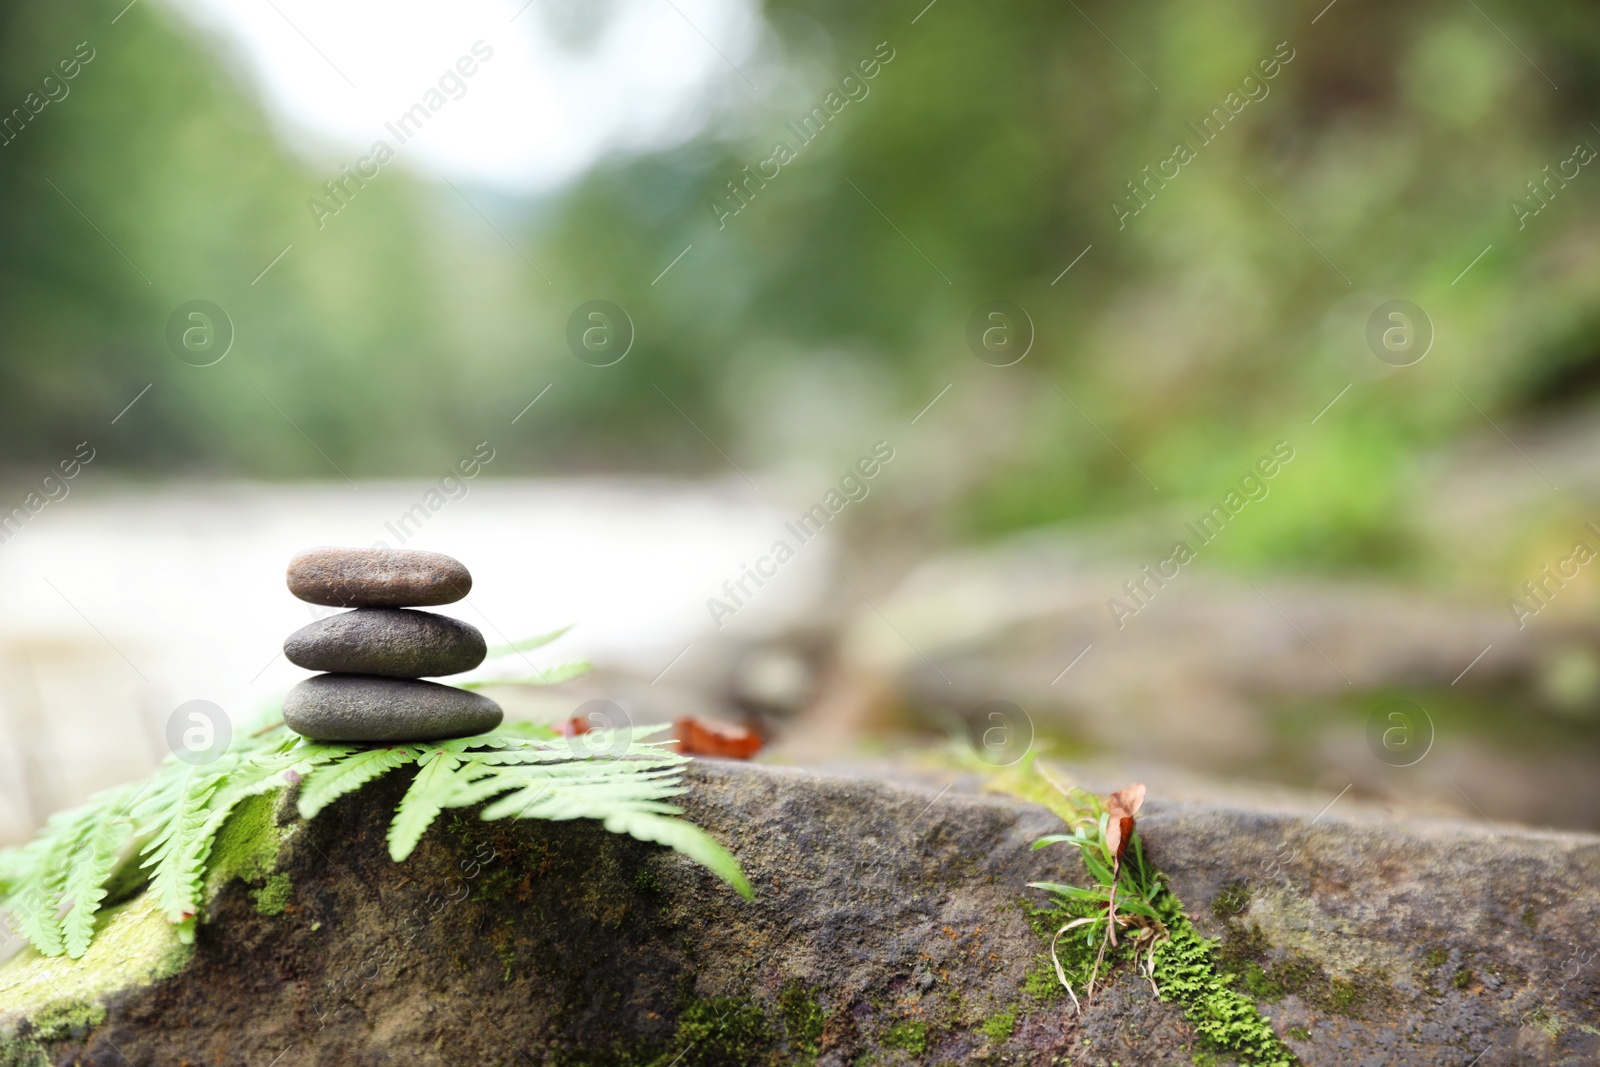 Photo of Balancing zen pebble stones outdoors against blurred background. Space for text